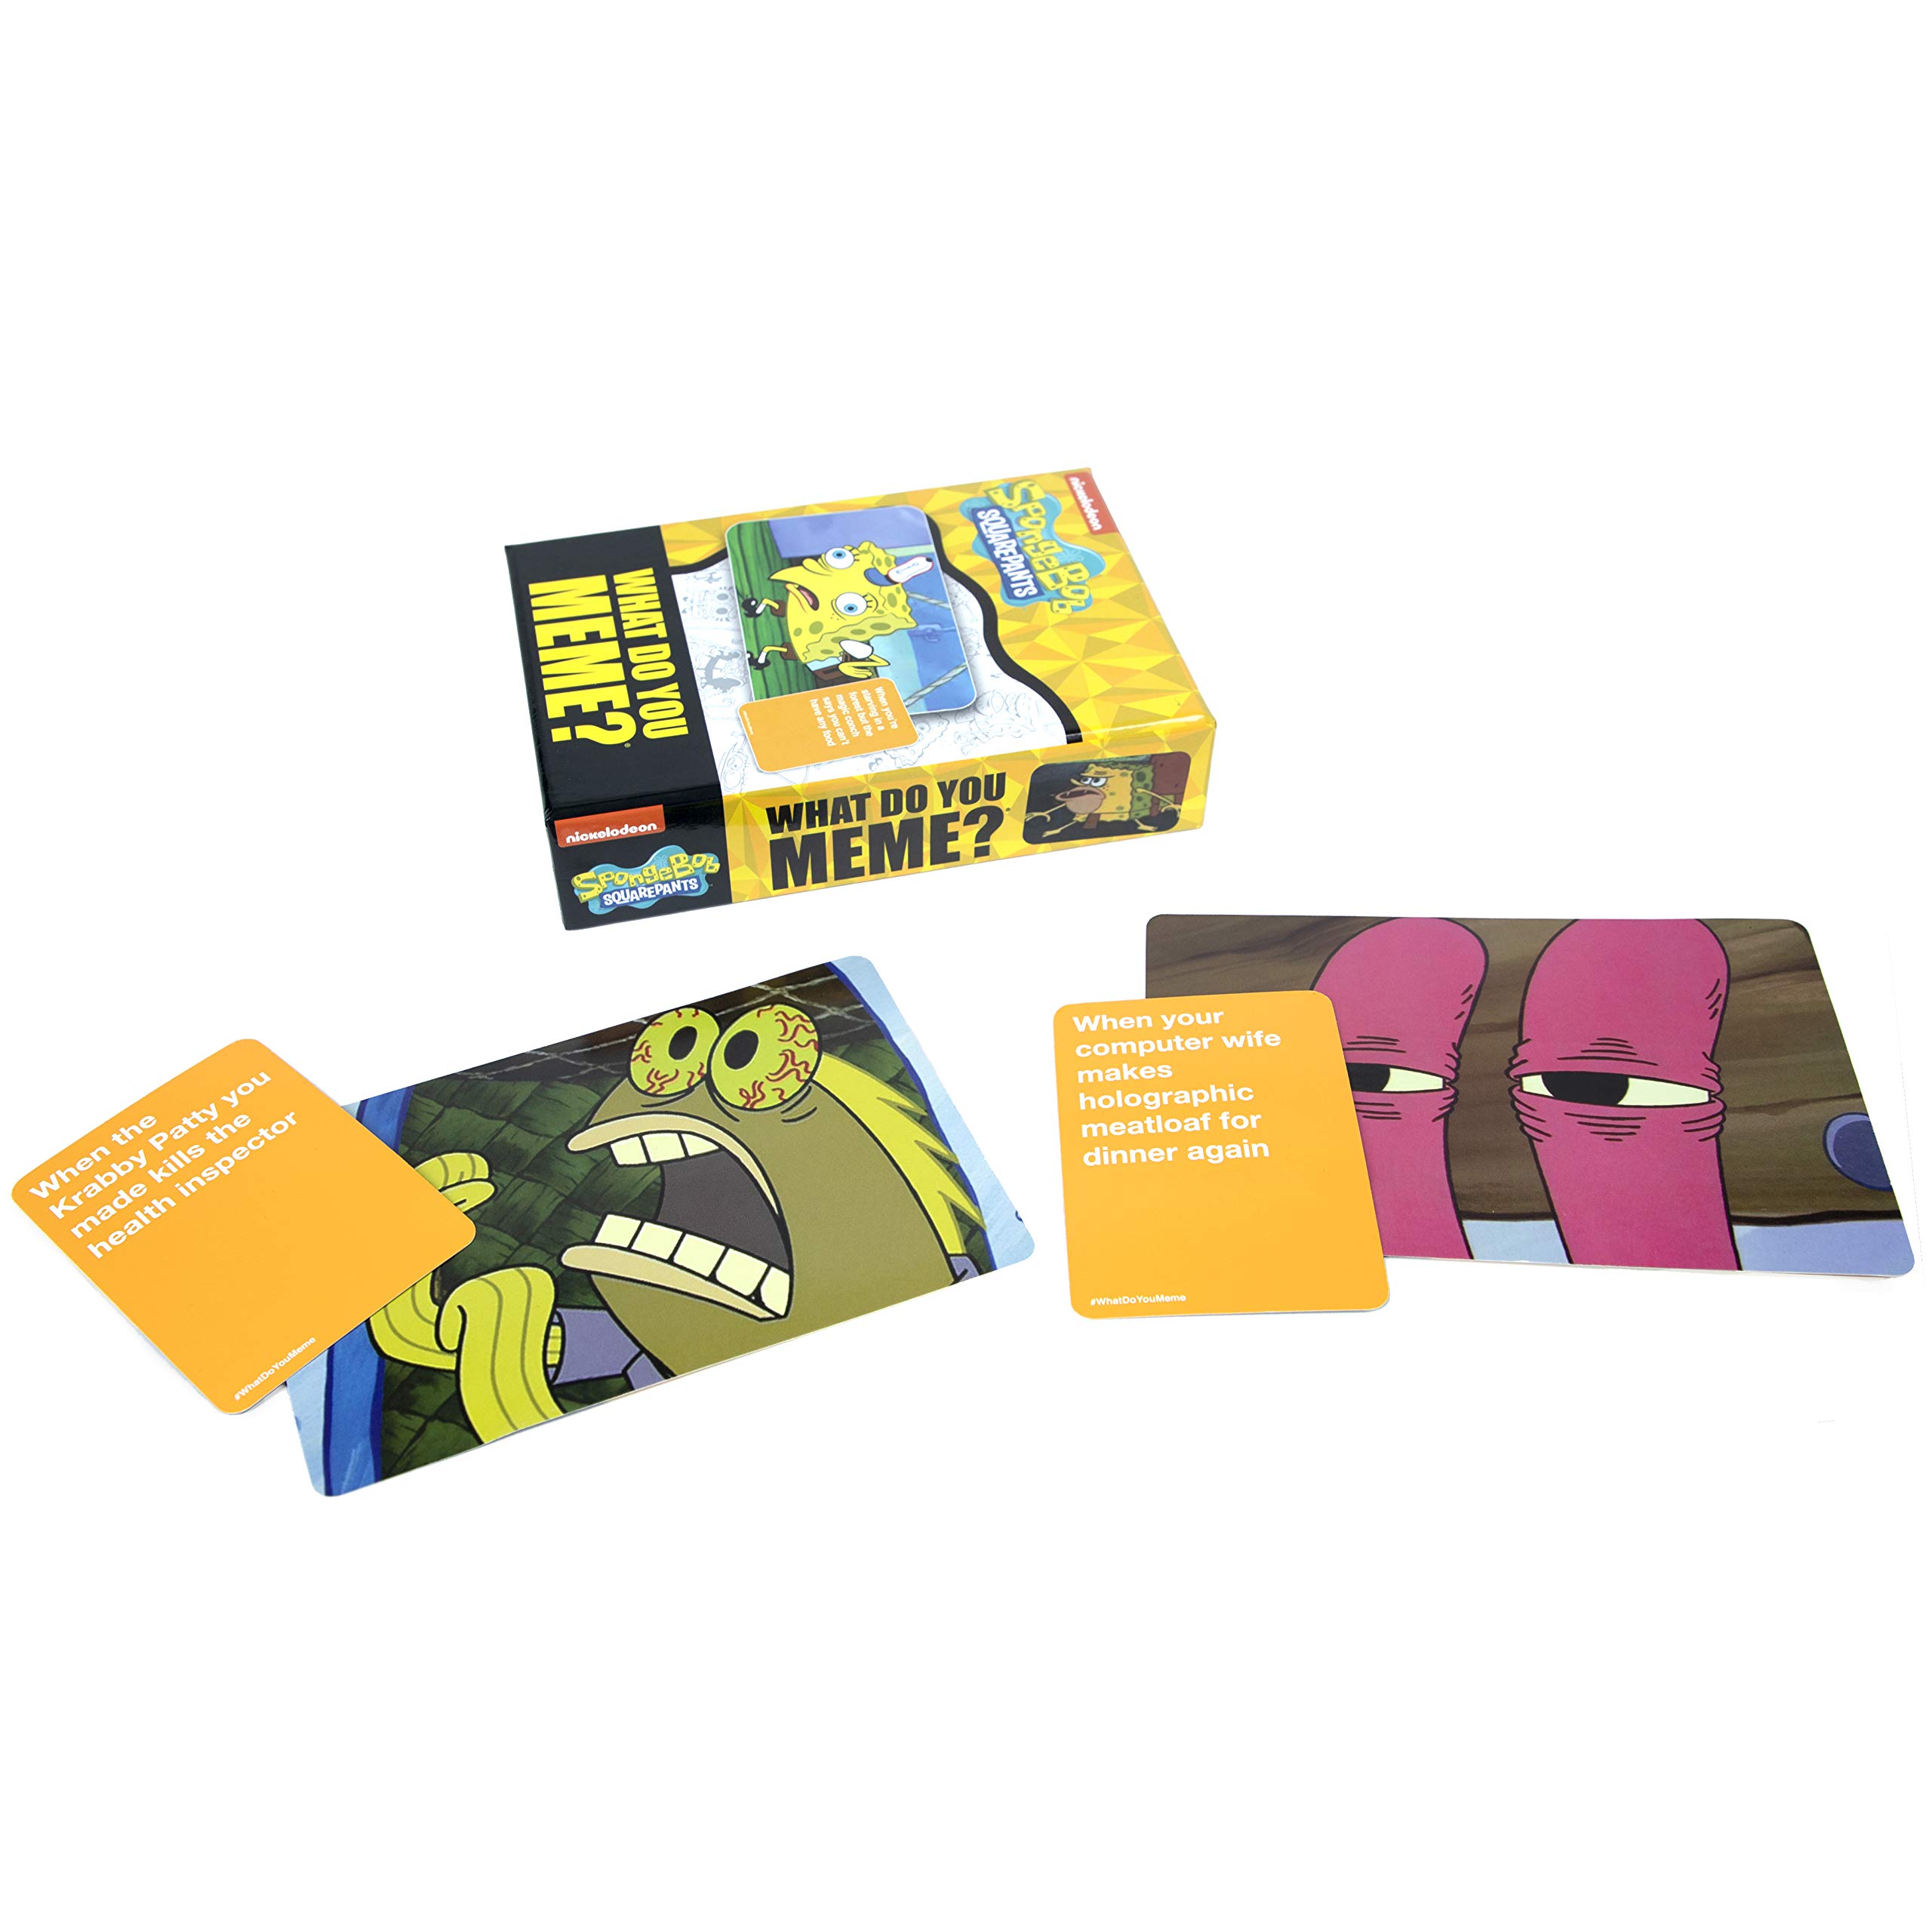 WHAT DO YOU MEME?® Spongebob Squarepants Expansion Pack - Family Card Games for Kids and Adults